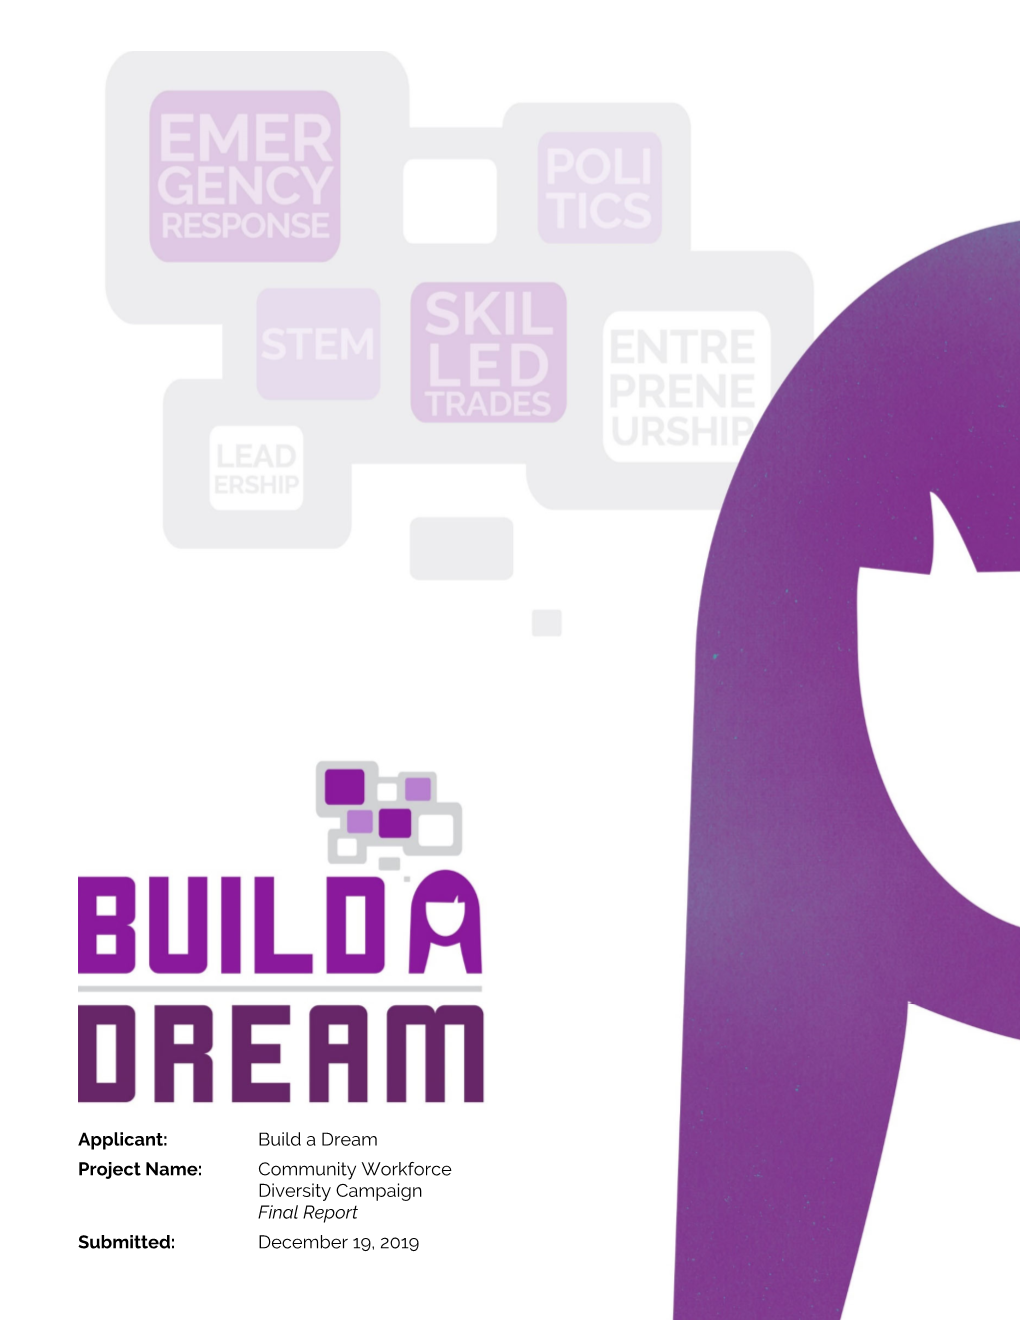 Applicant: Build a Dream Project Name: Community Workforce Diversity Campaign Final Report Submitted: December 19, 2019